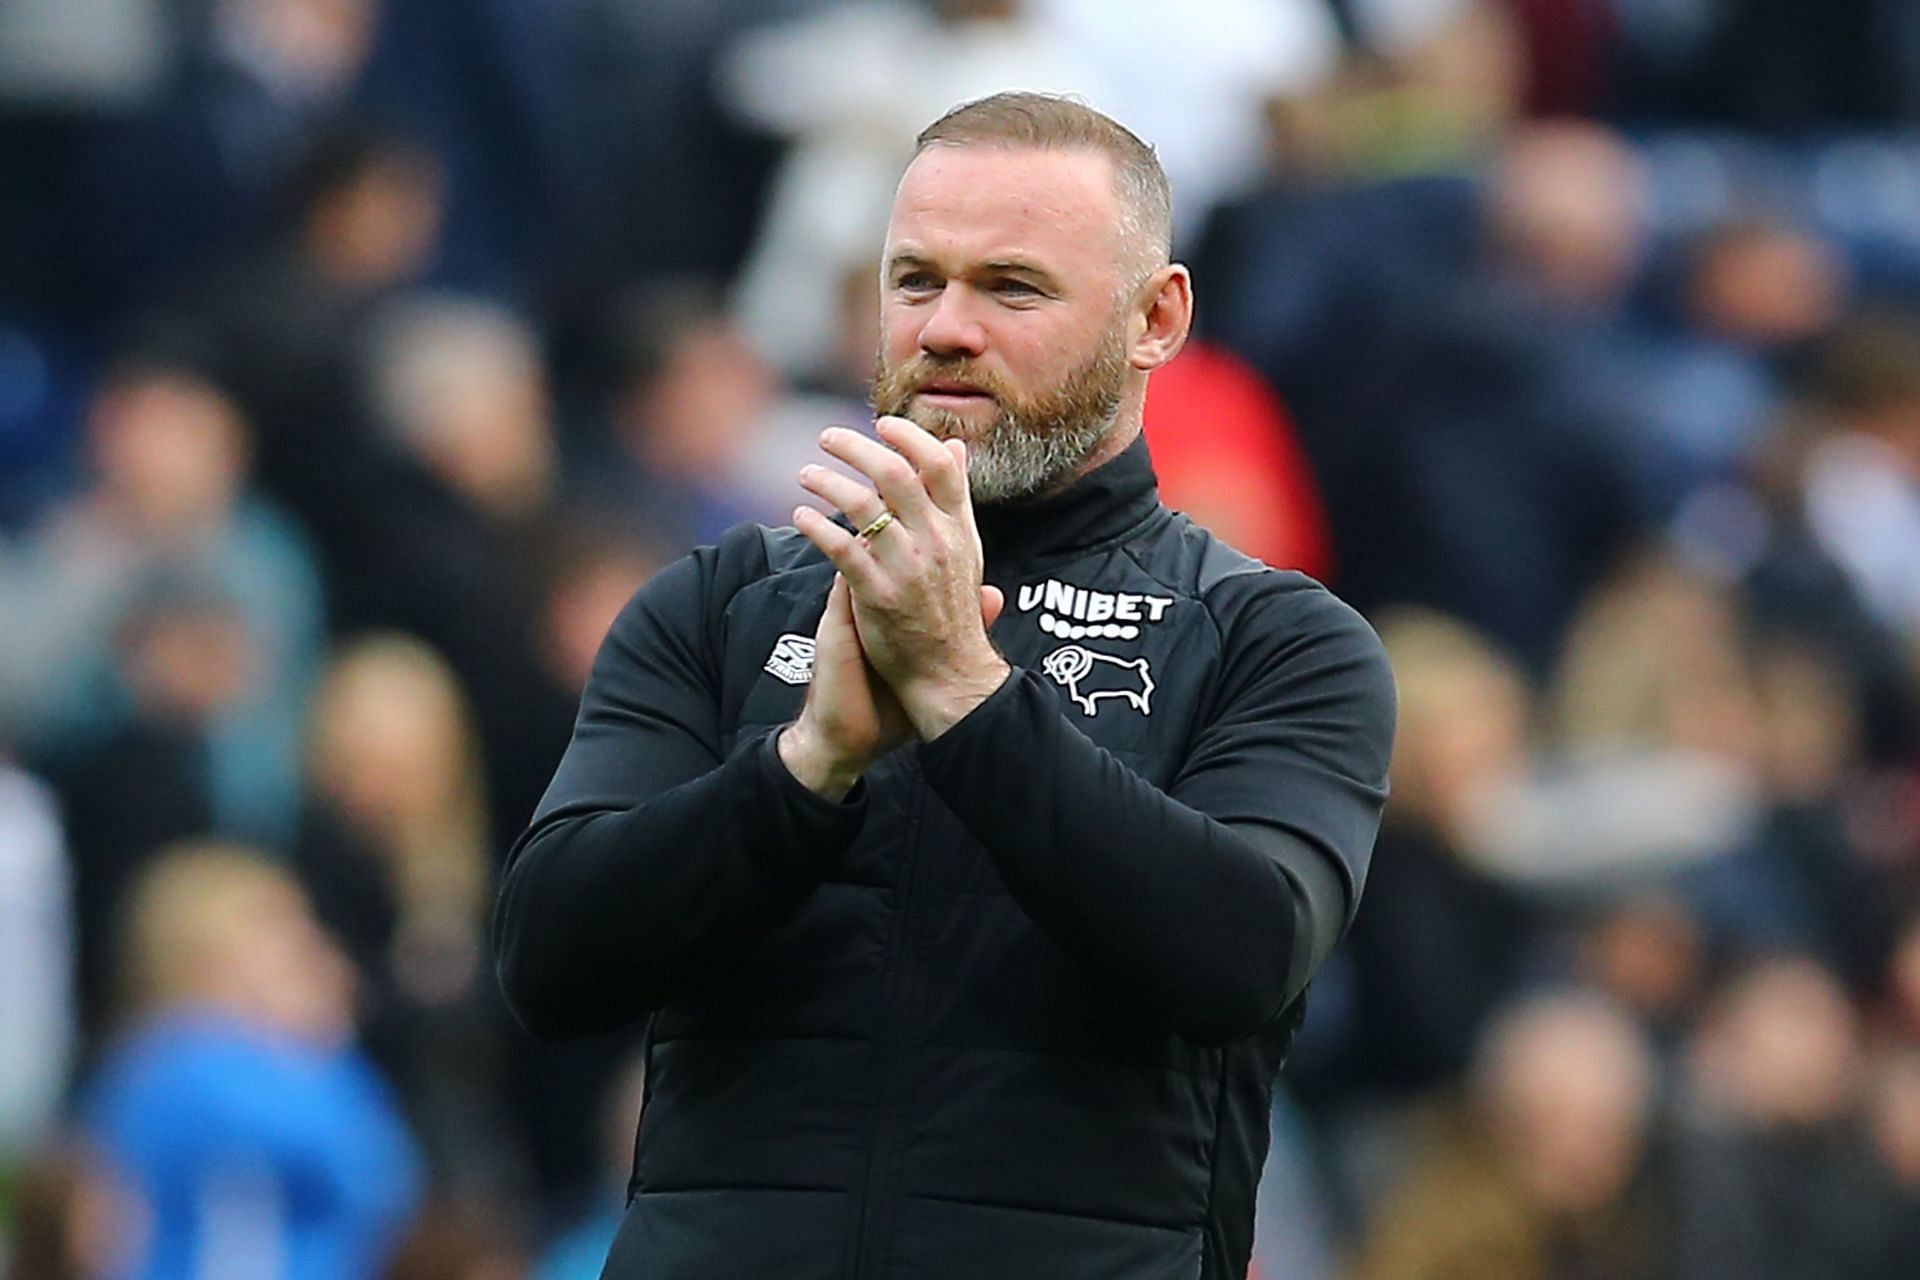 Wayne Rooney has blasted Manchester United players for lacking intent against Liverpool.